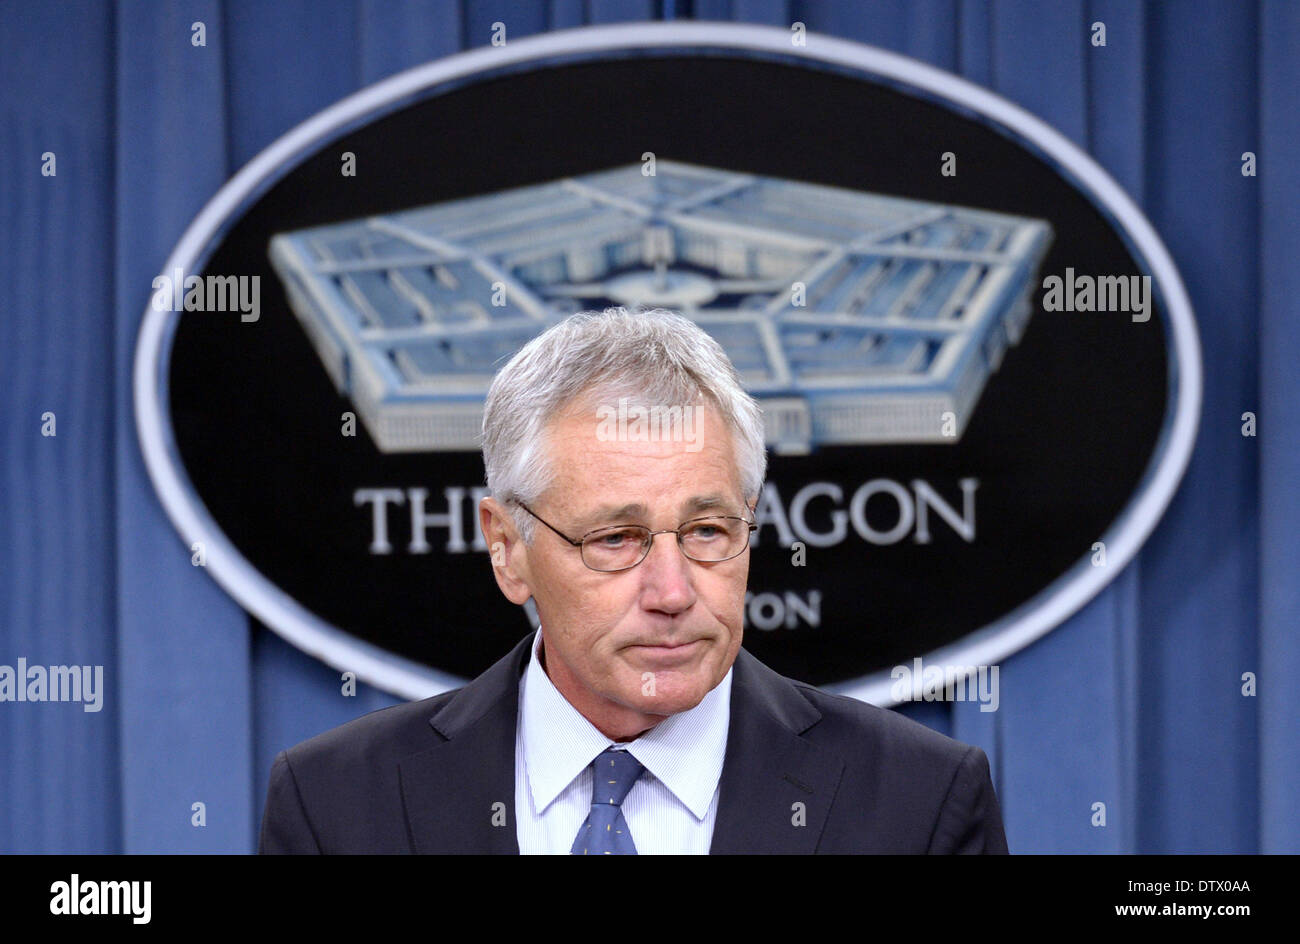 Washington DC, USA. 24th Feb, 2014. U.S. Secretary of Defense Chuck Hagel attends a press conference at the Pentagon, Washington DC, the United States, Feb. 24, 2014. U.S. Defense Secretary Chuck Hagel outlined on Monday his priorities for 2015 defense budget cut, including plans to reduce the size of the U.S. army to its pre-World War II levels. Credit:  Yin Bogu/Xinhua/Alamy Live News Stock Photo